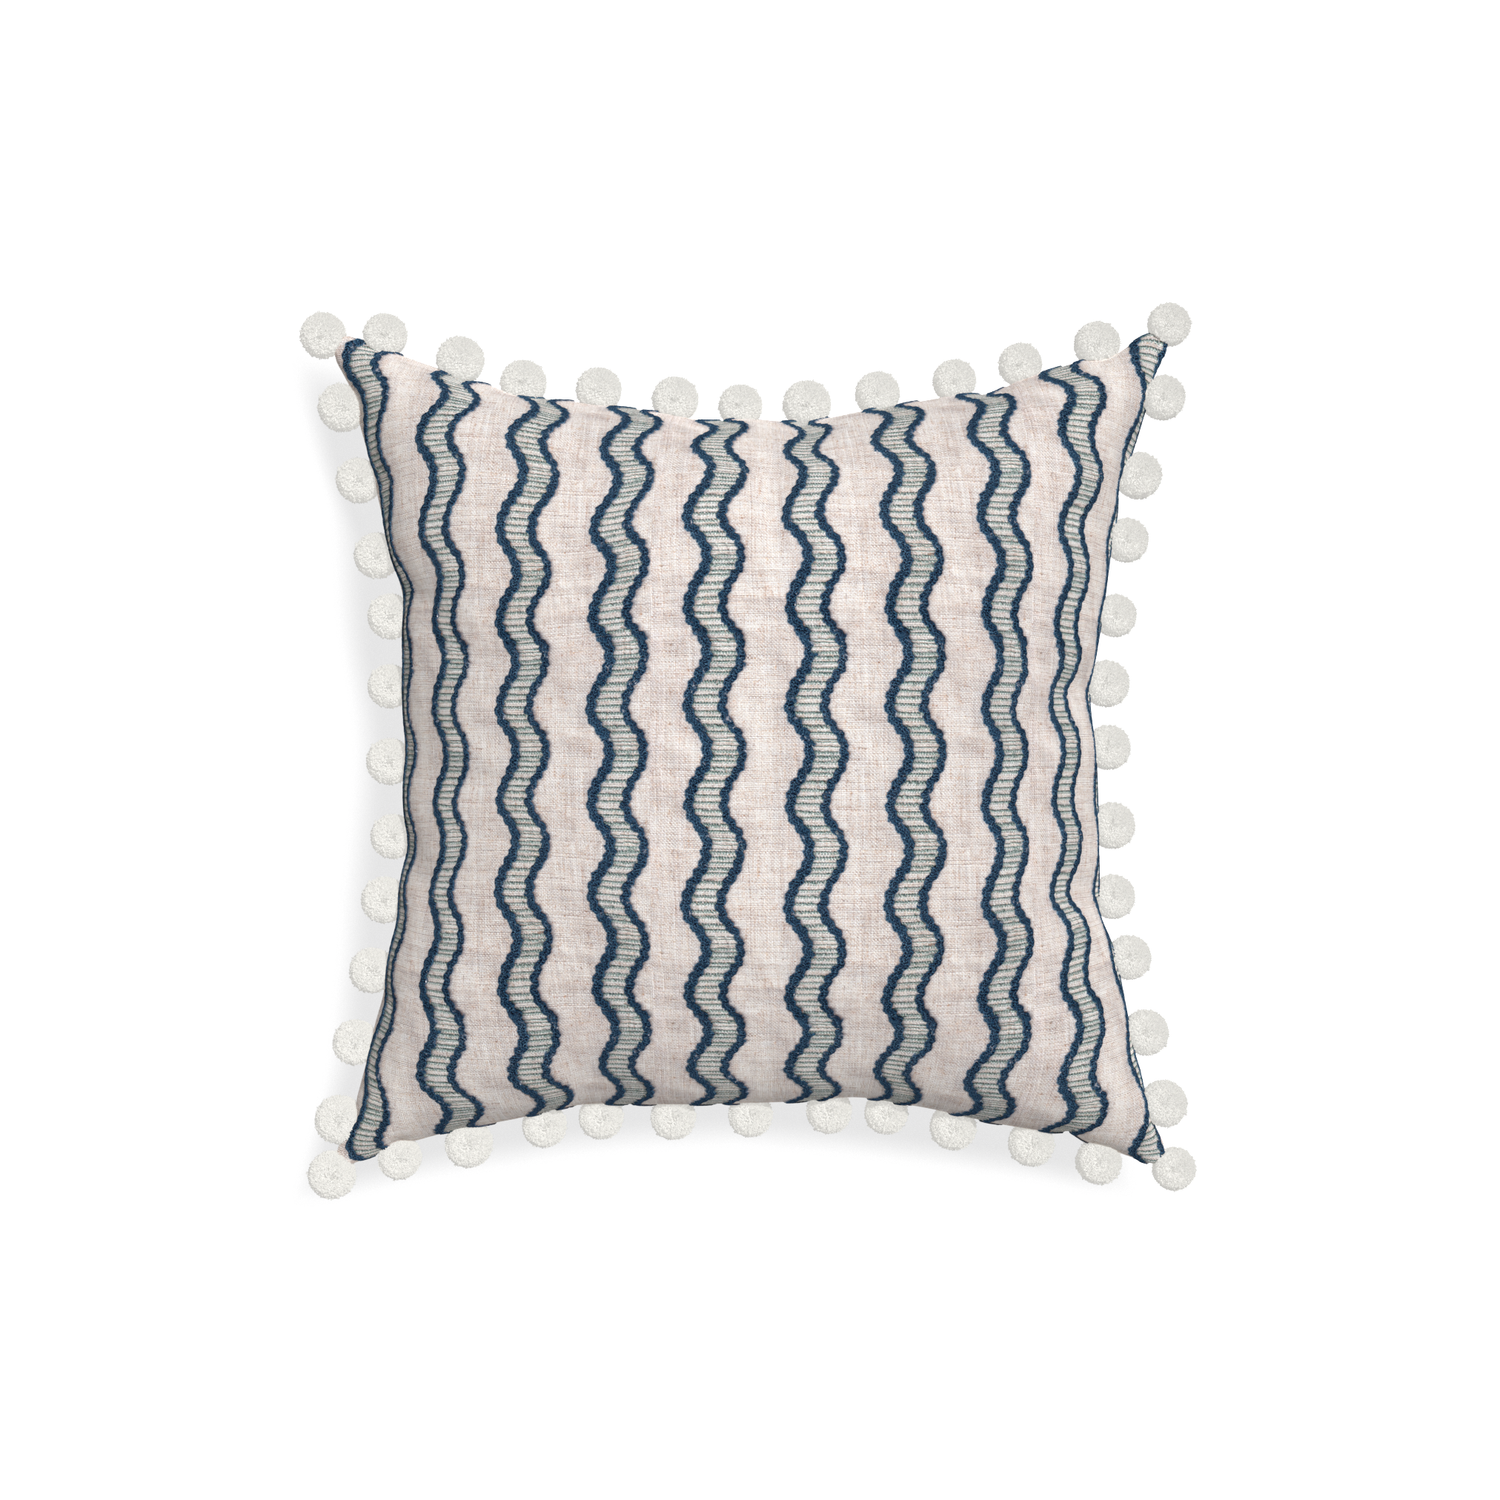 18-square beatrice custom embroidered wavepillow with snow pom pom on white background